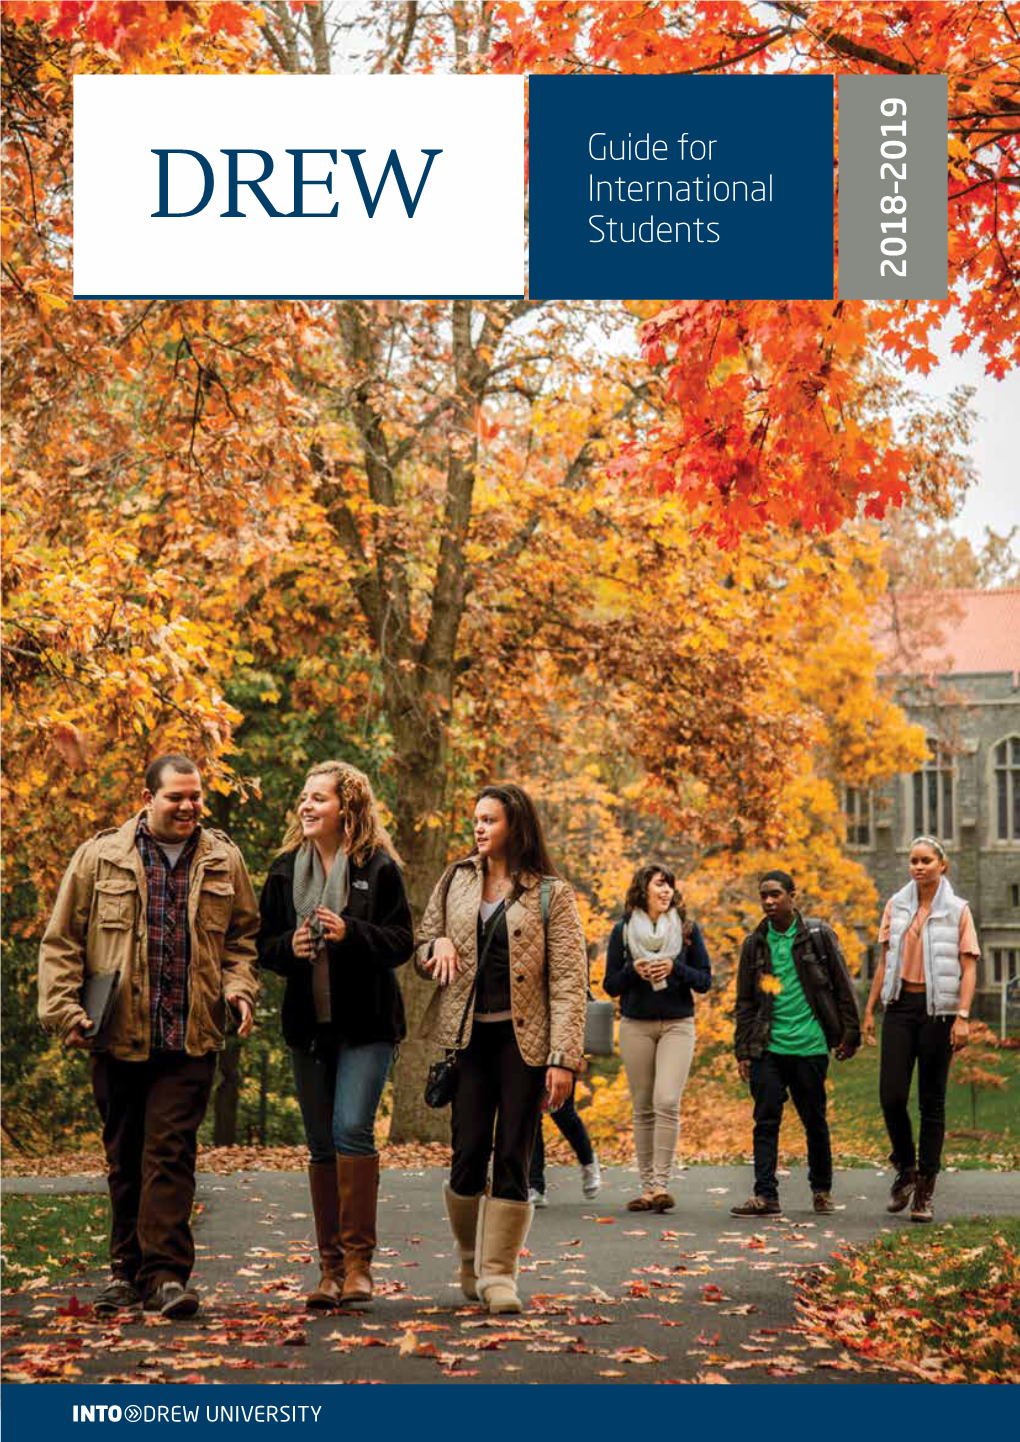 Guide for International Students Why Choose Drew University?